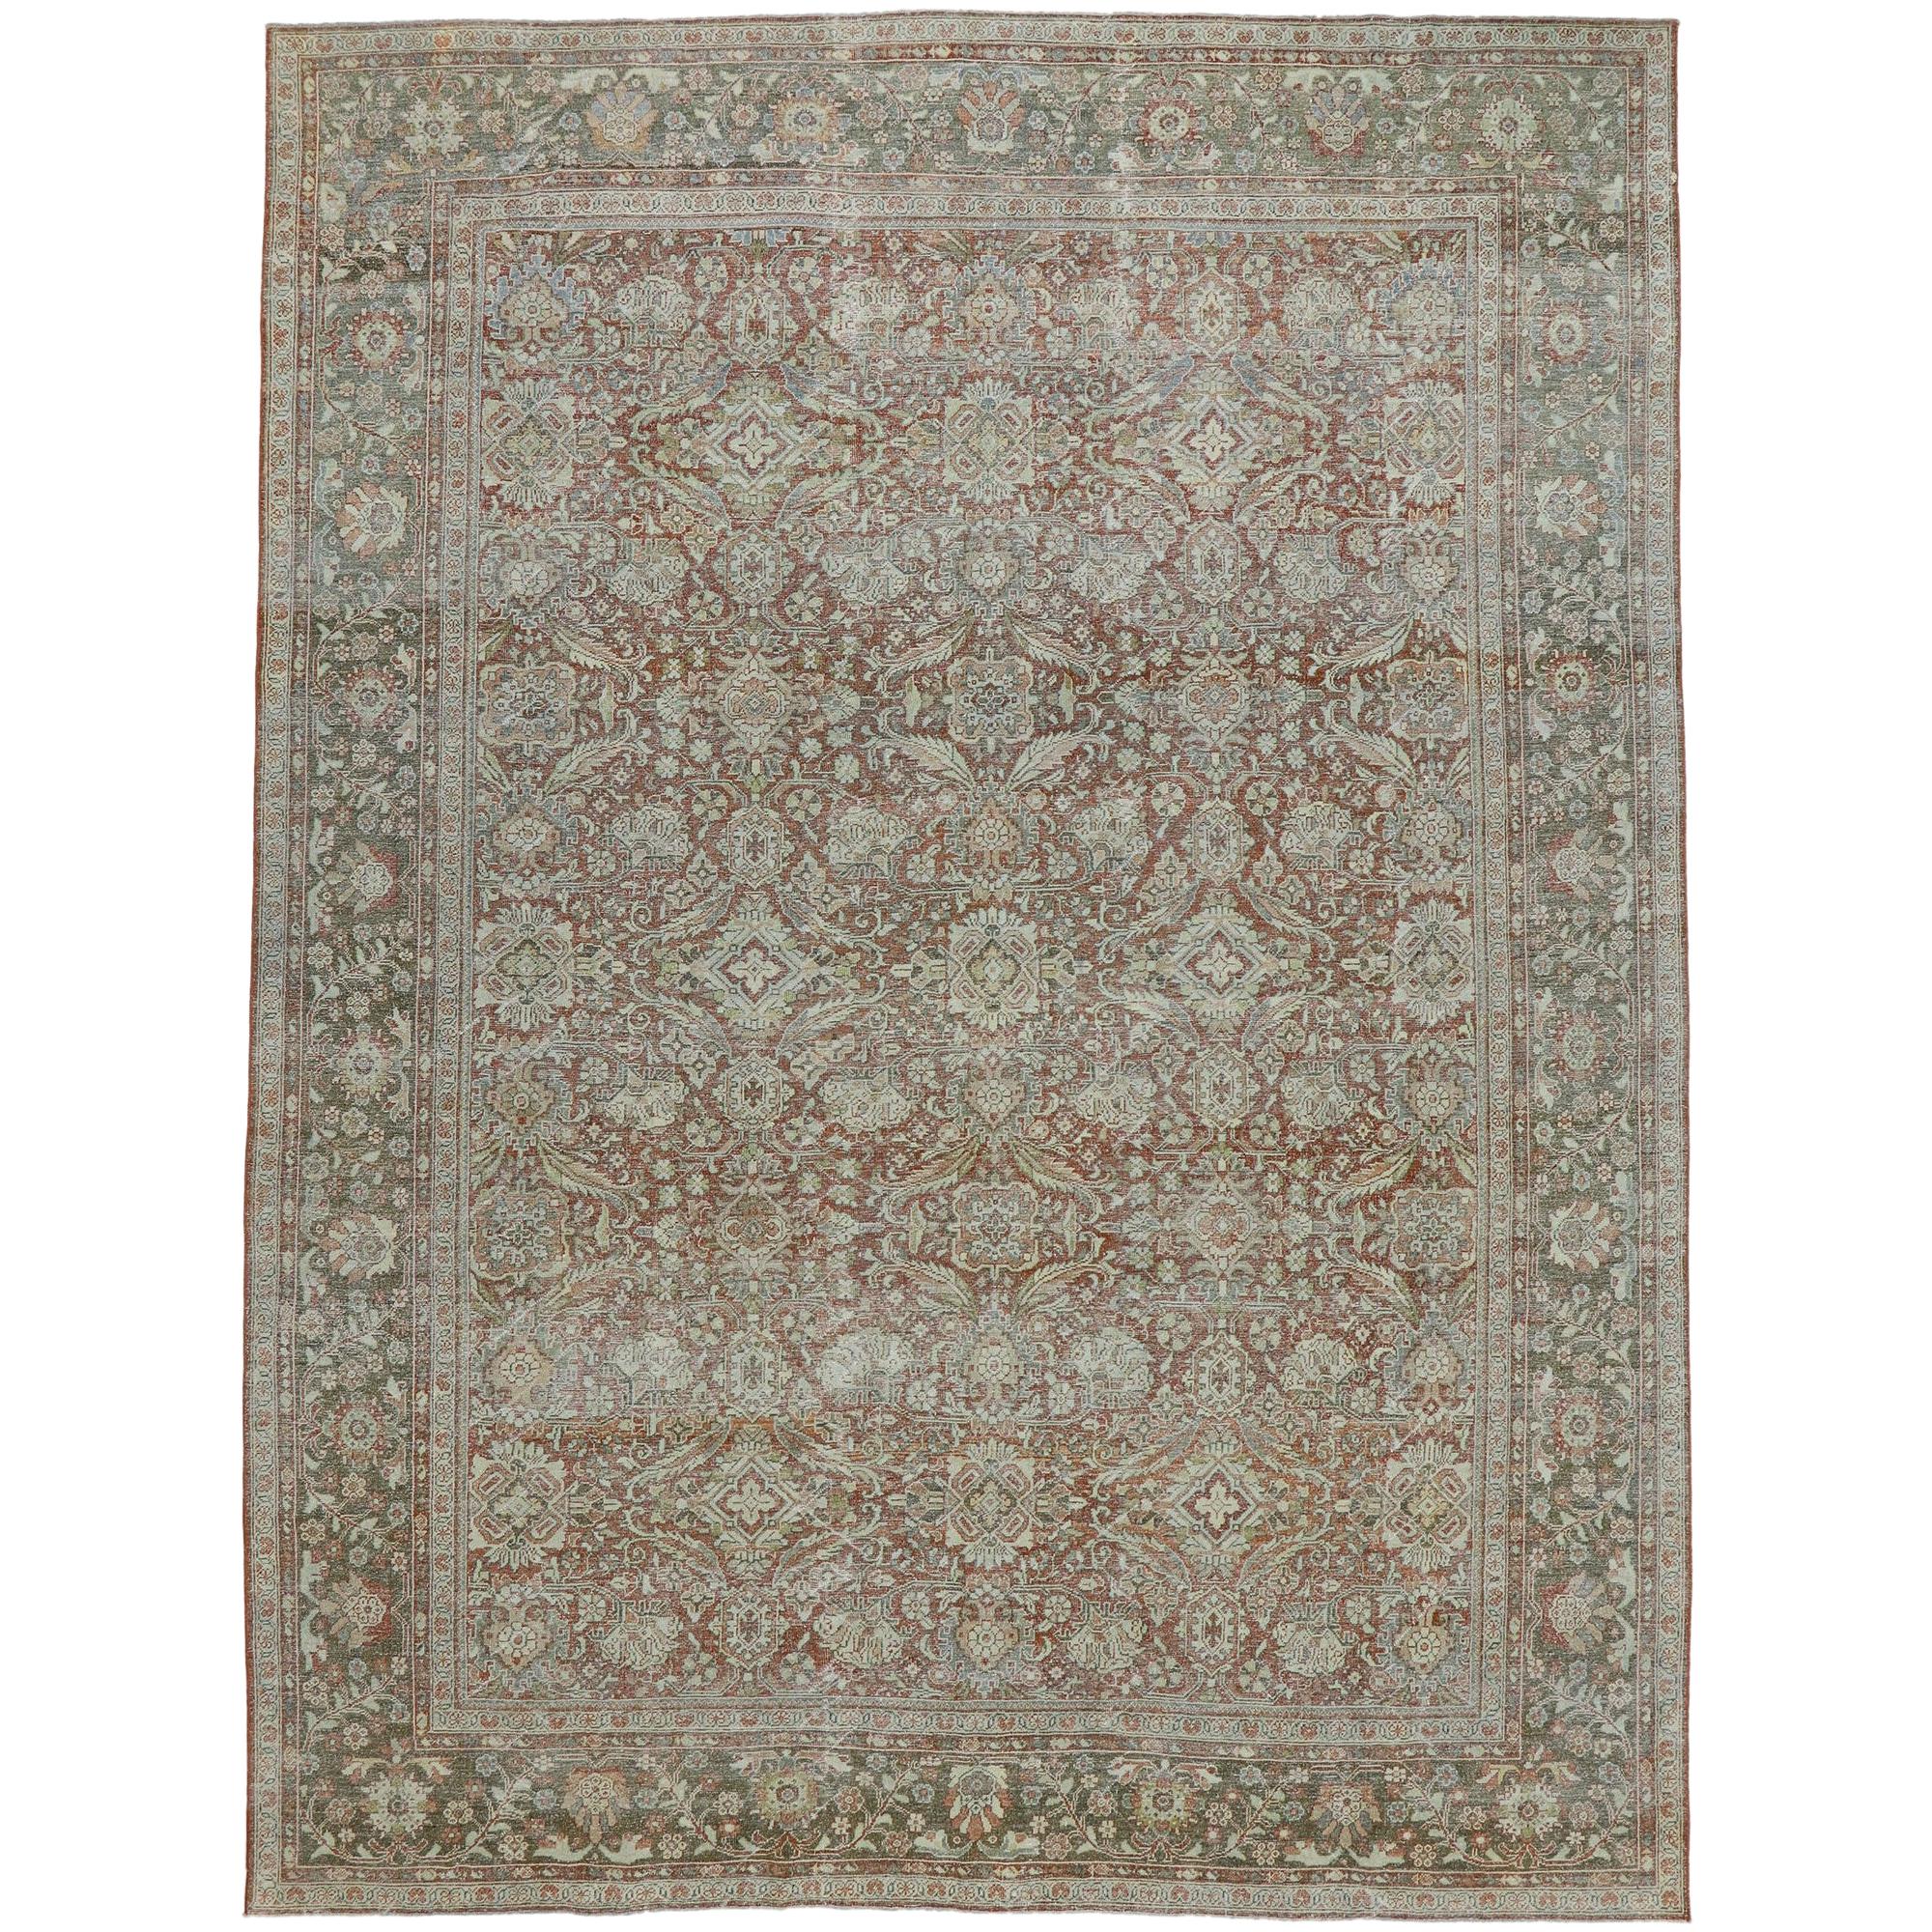 Distressed Antique Persian Mahal Rug with Rustic American Colonial Style